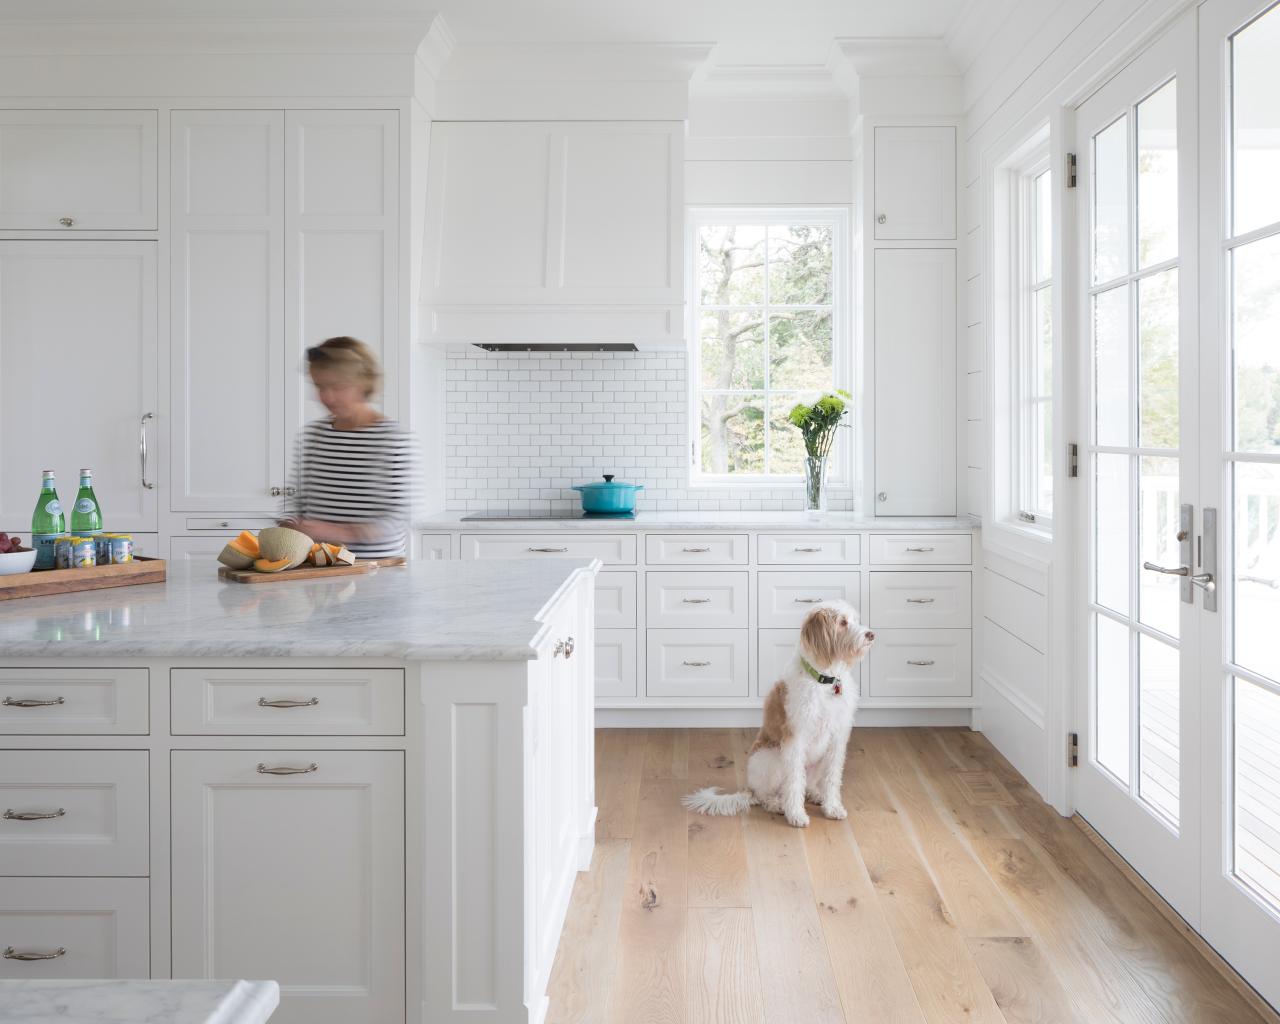 The Best Vinyl Plank Flooring For Your, What Is The Best Floor For A Kitchen With Dogs